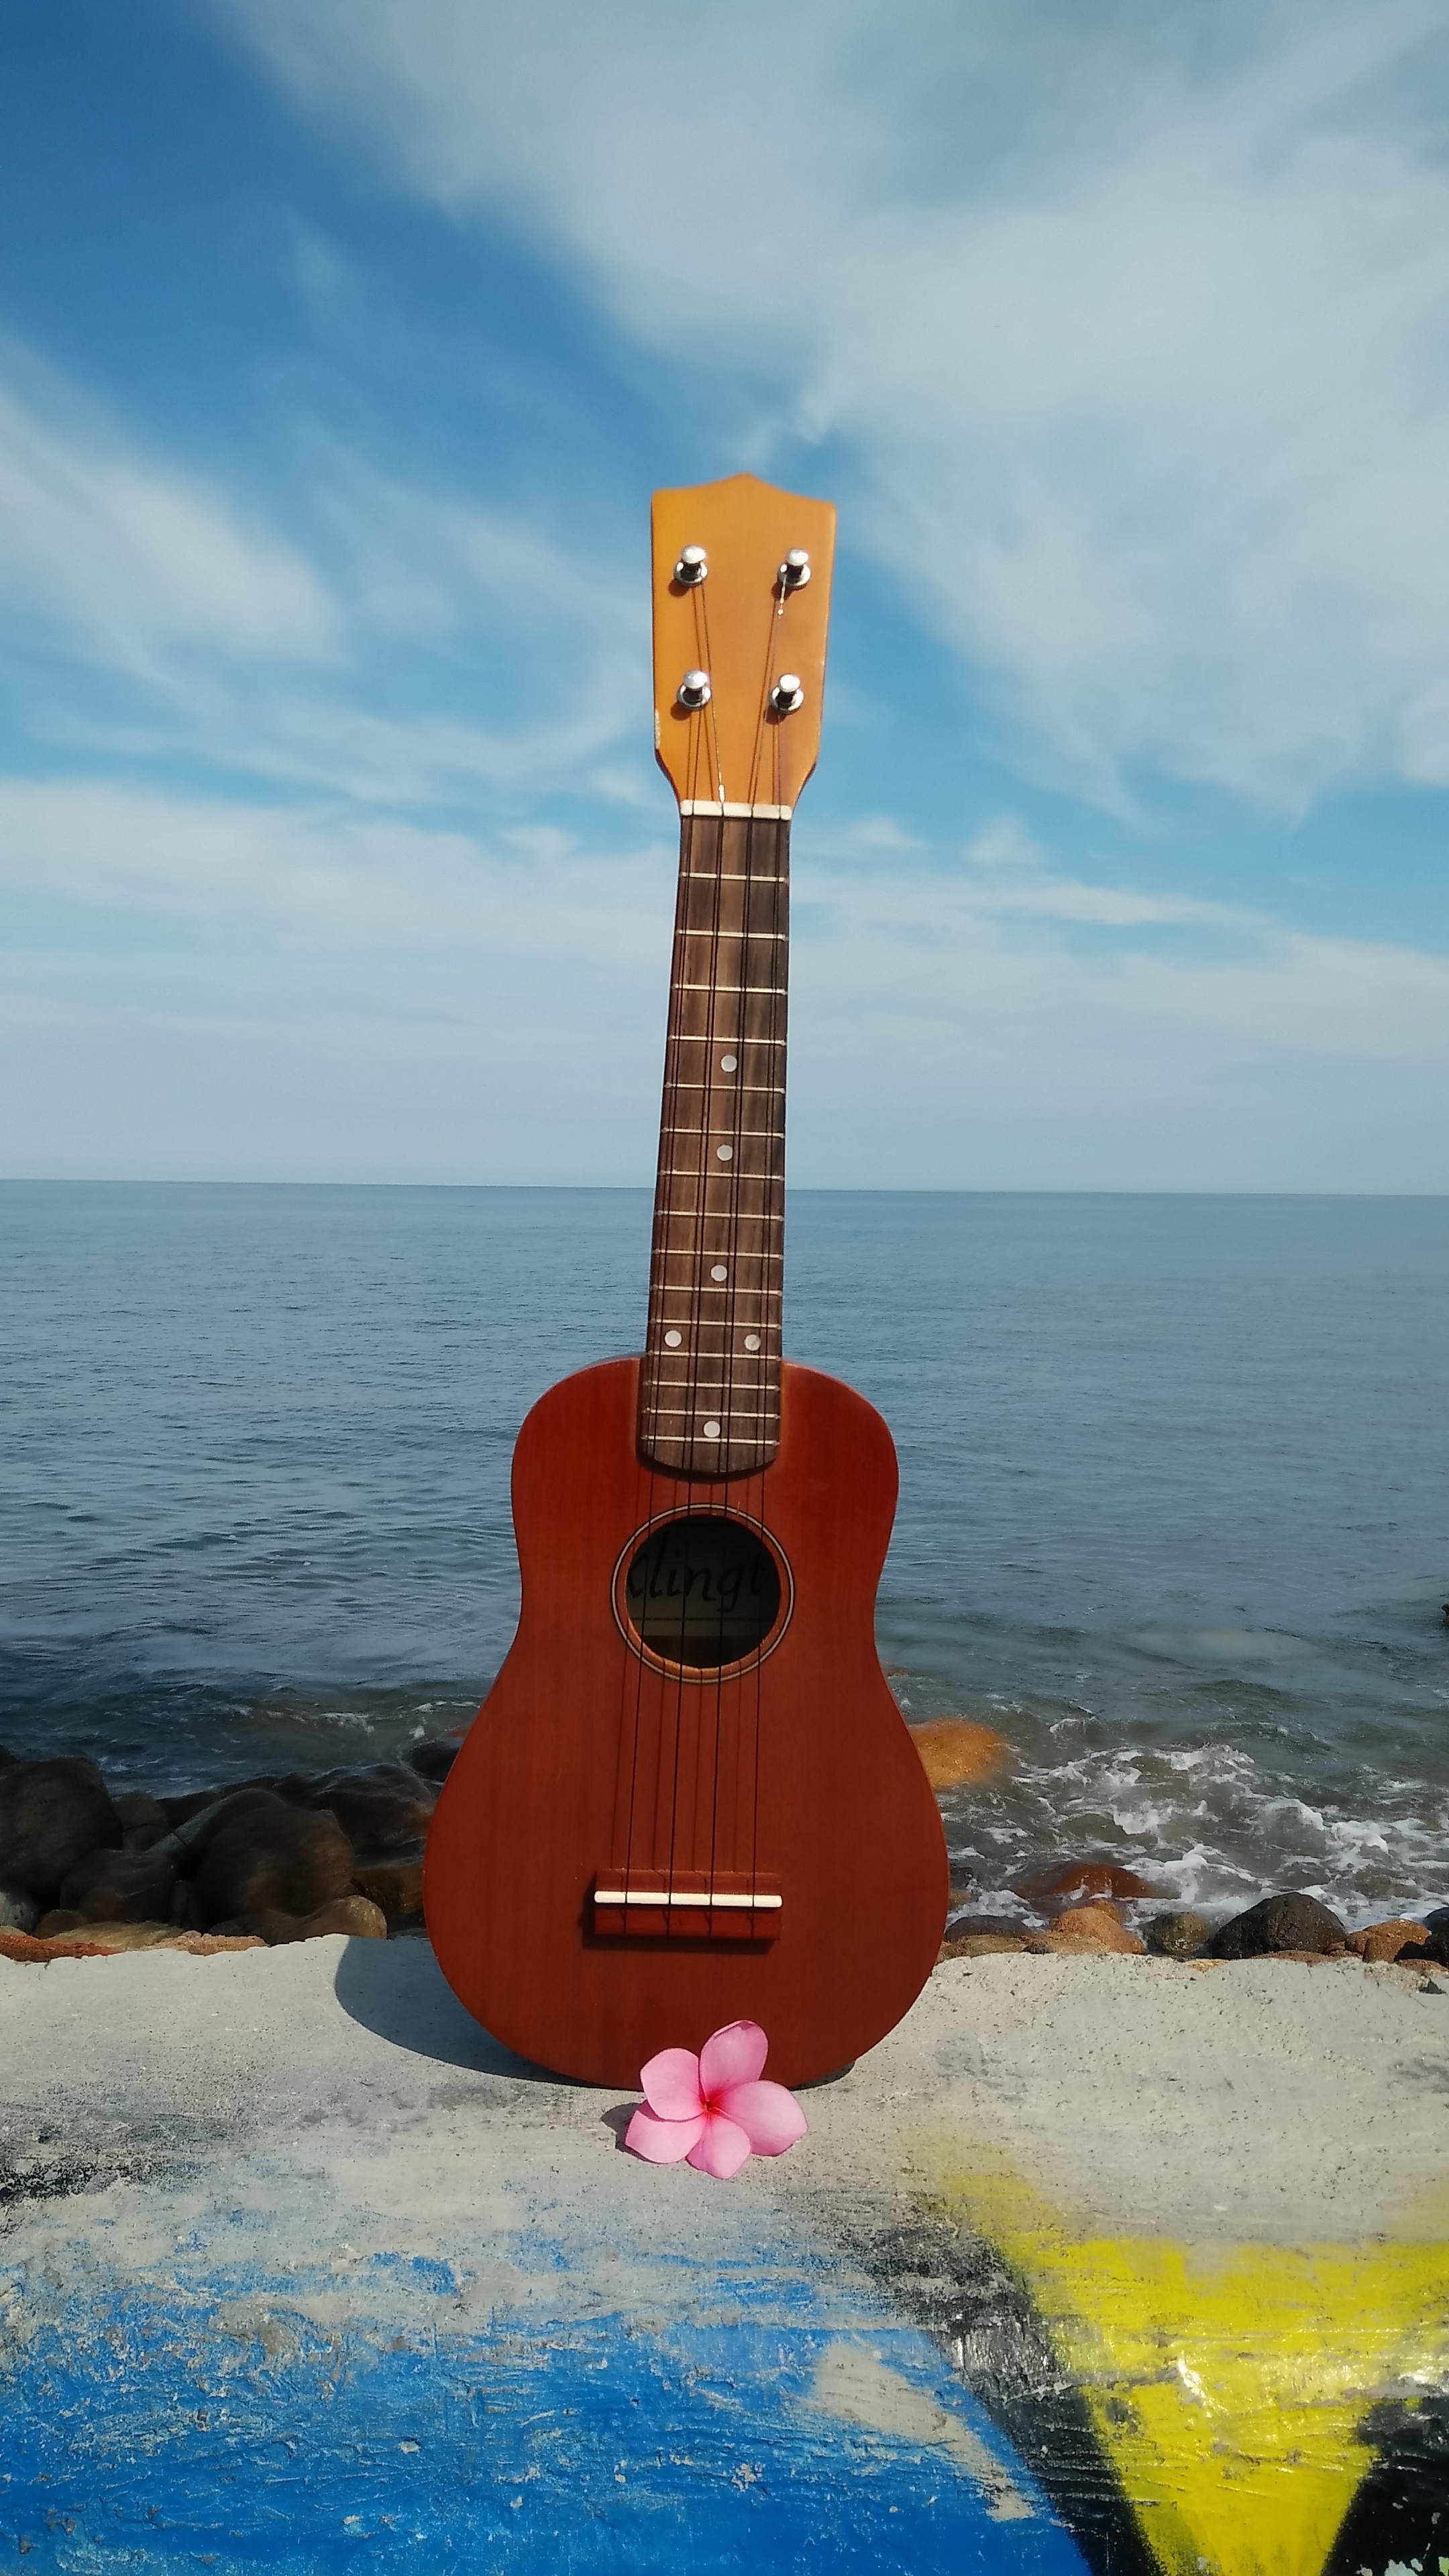 Ukulele: Hawaiian style musical instrument, Commonly come in four sizes: soprano, concert, tenor, and baritone. 2160x3840 4K Wallpaper.